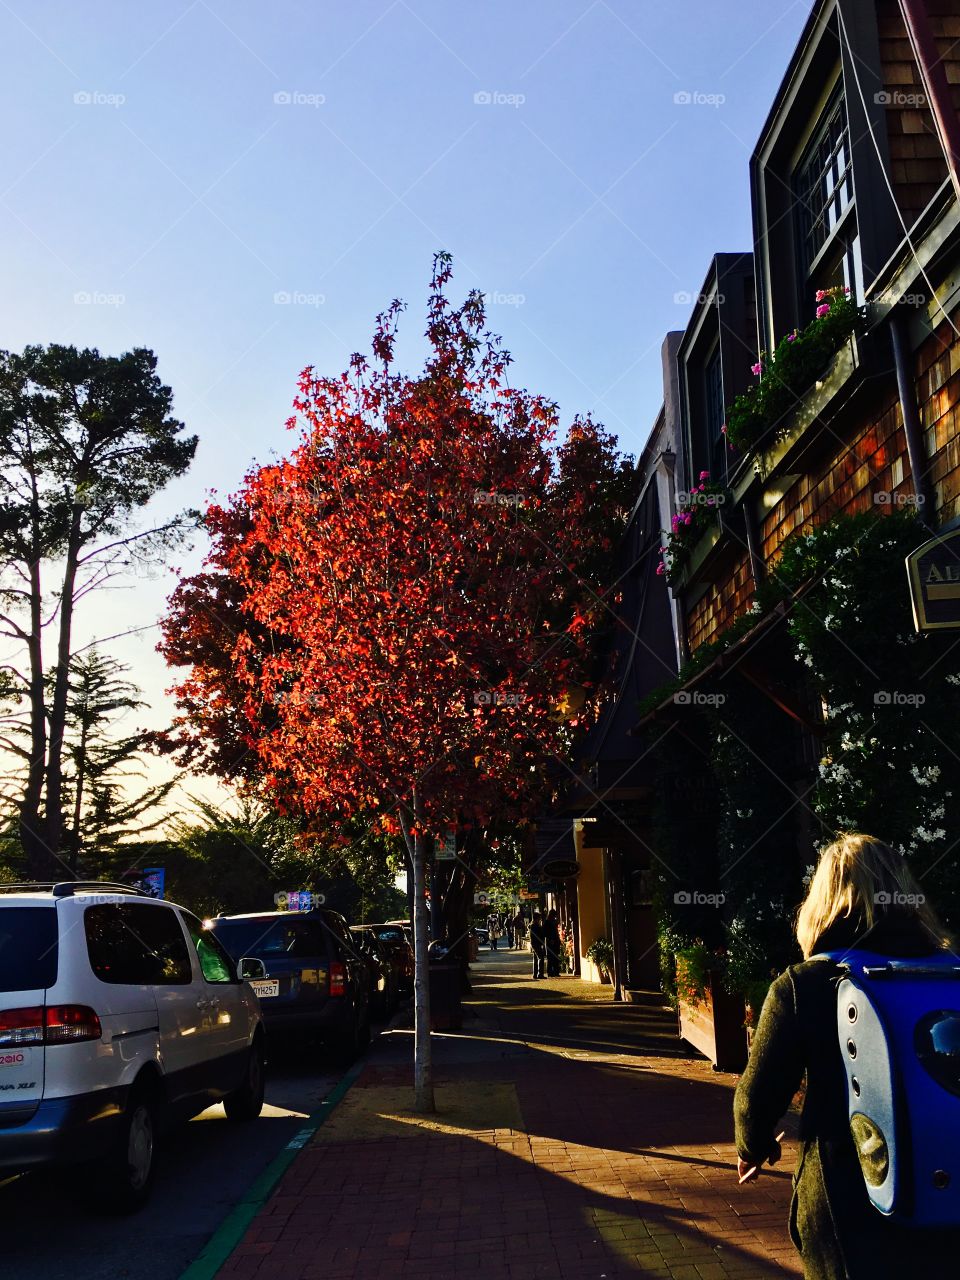 Carmel by the Sea -
Fall Walk, Red Tree, along street lines with shops